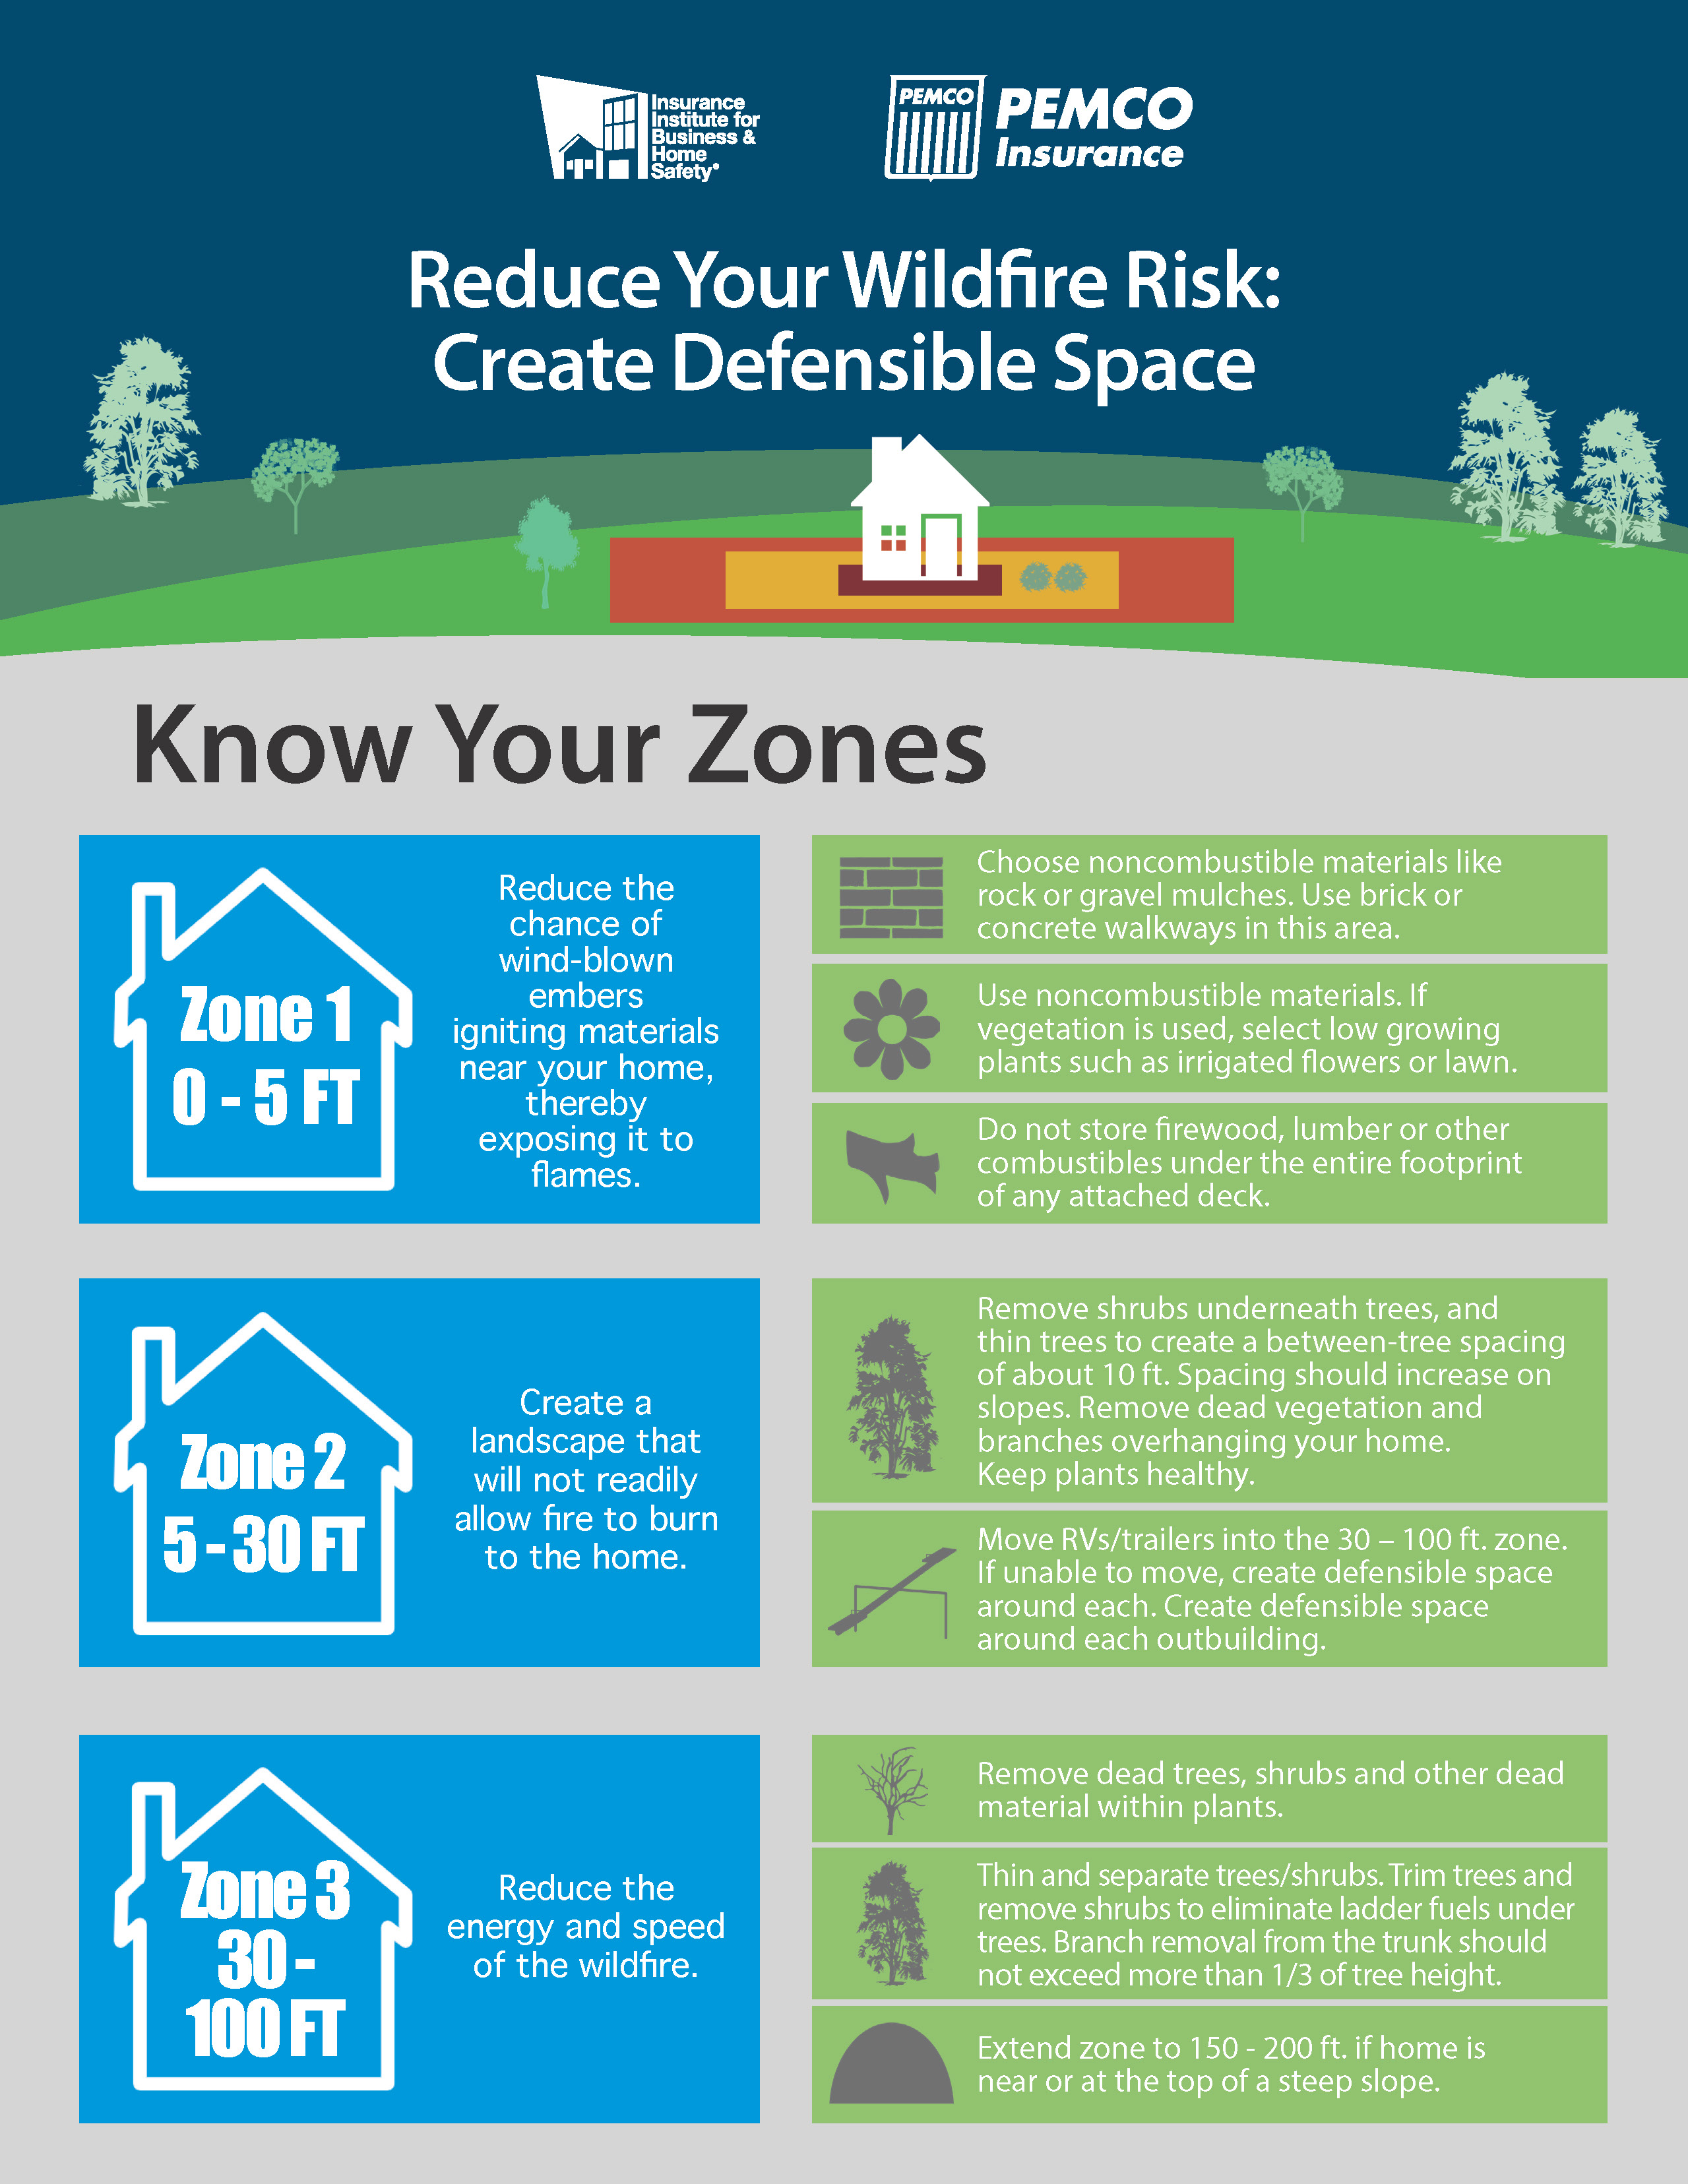 WILDFIRE-Defensible-Space-PEMCO_KnowYourZone.jpg